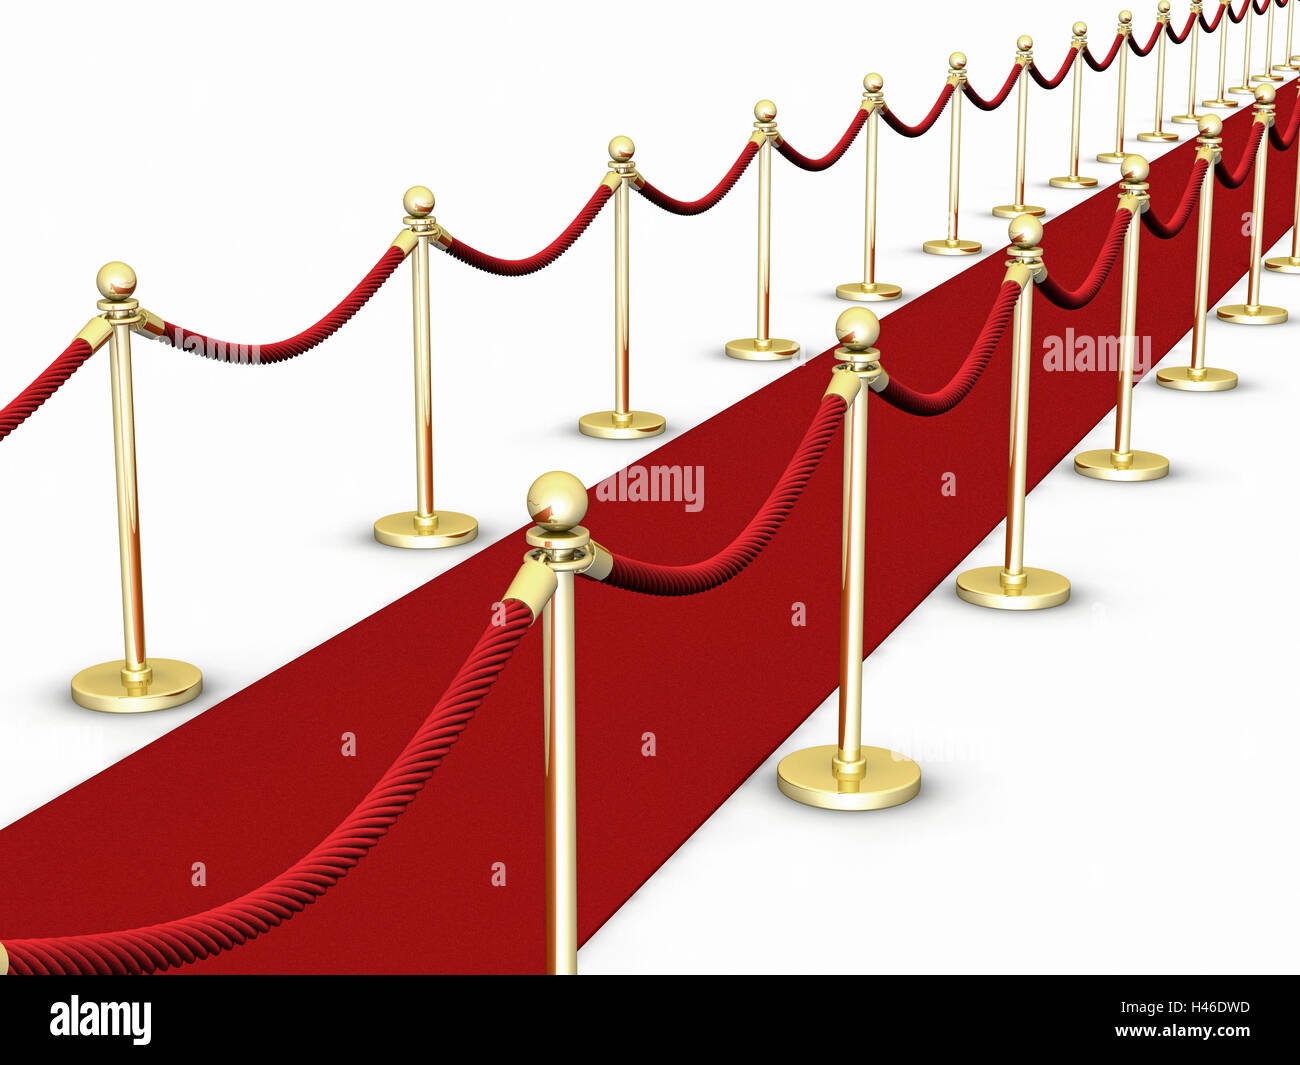 Red carpet with barrier, background white, Stock Photo